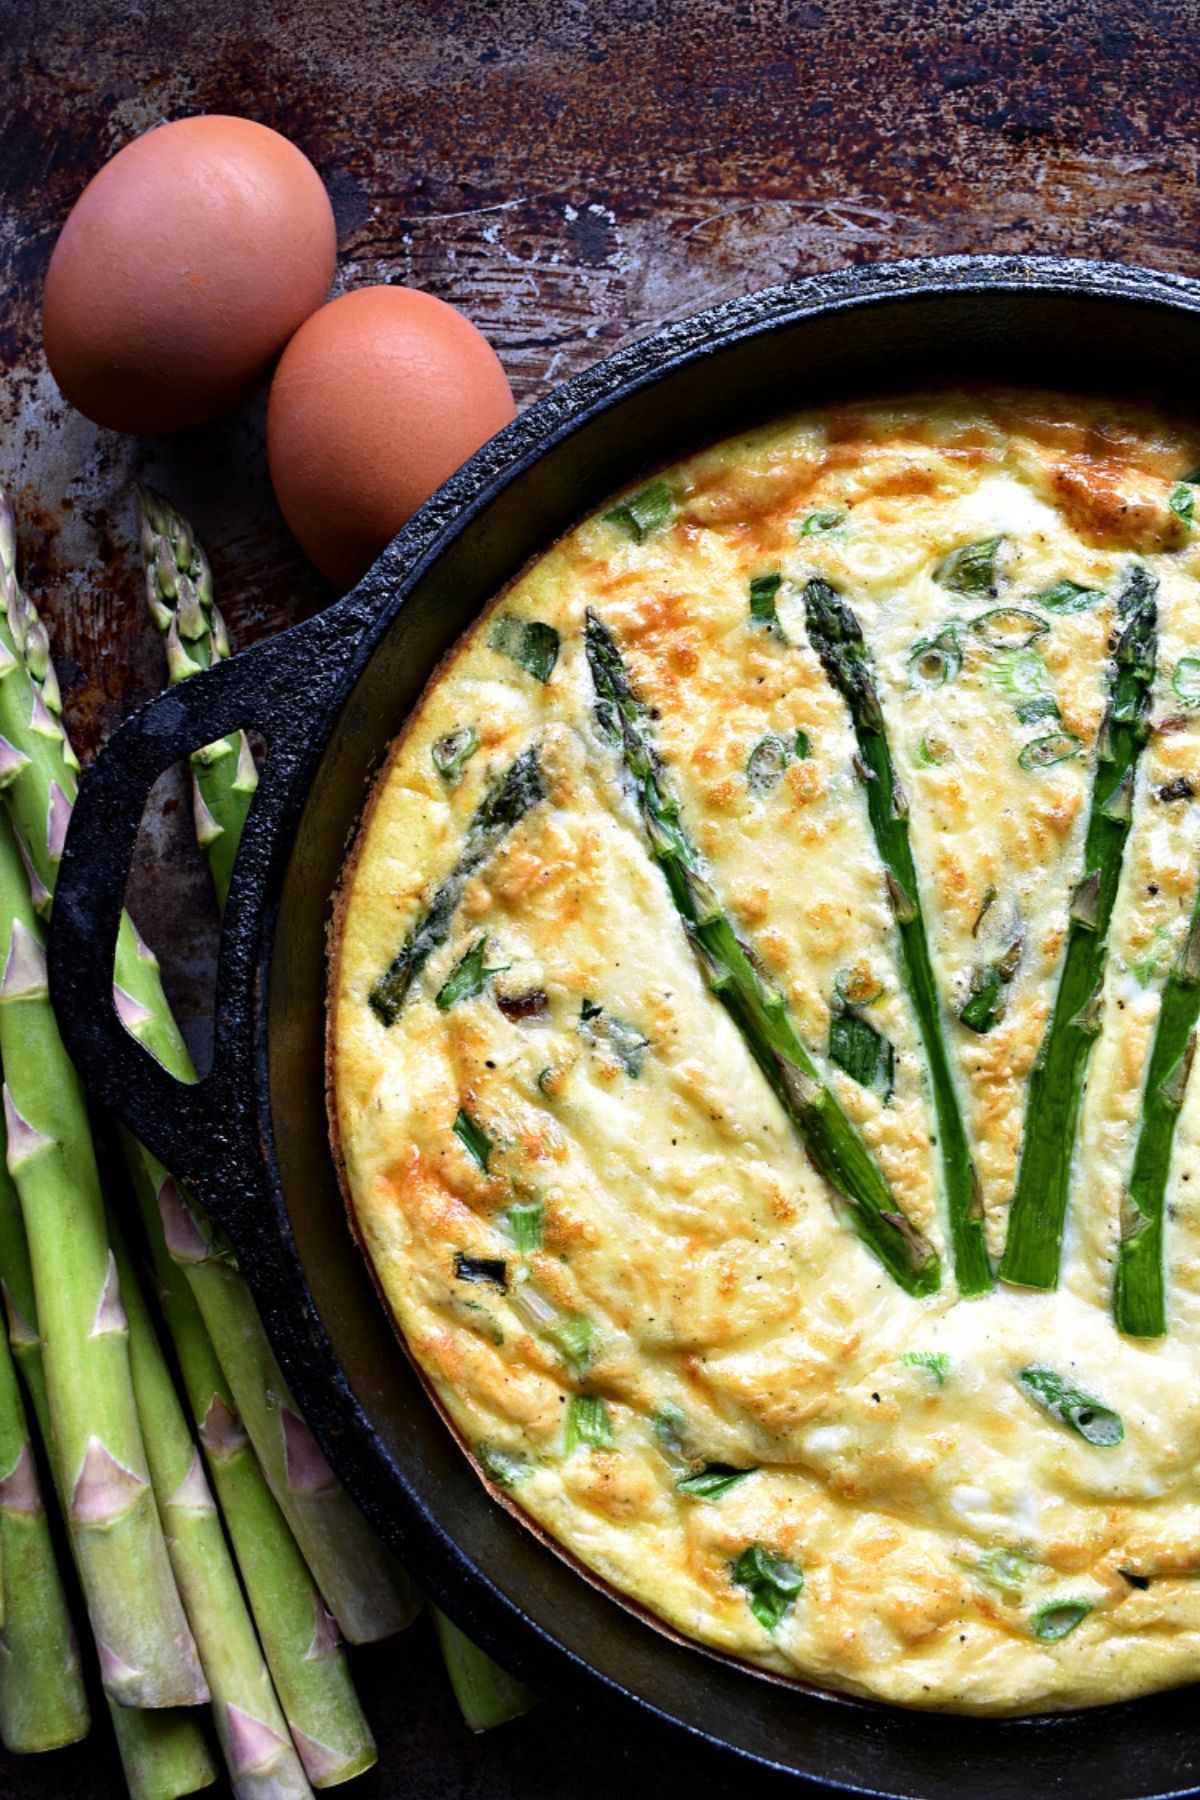 Cast iron skillet with asparagus in eggs